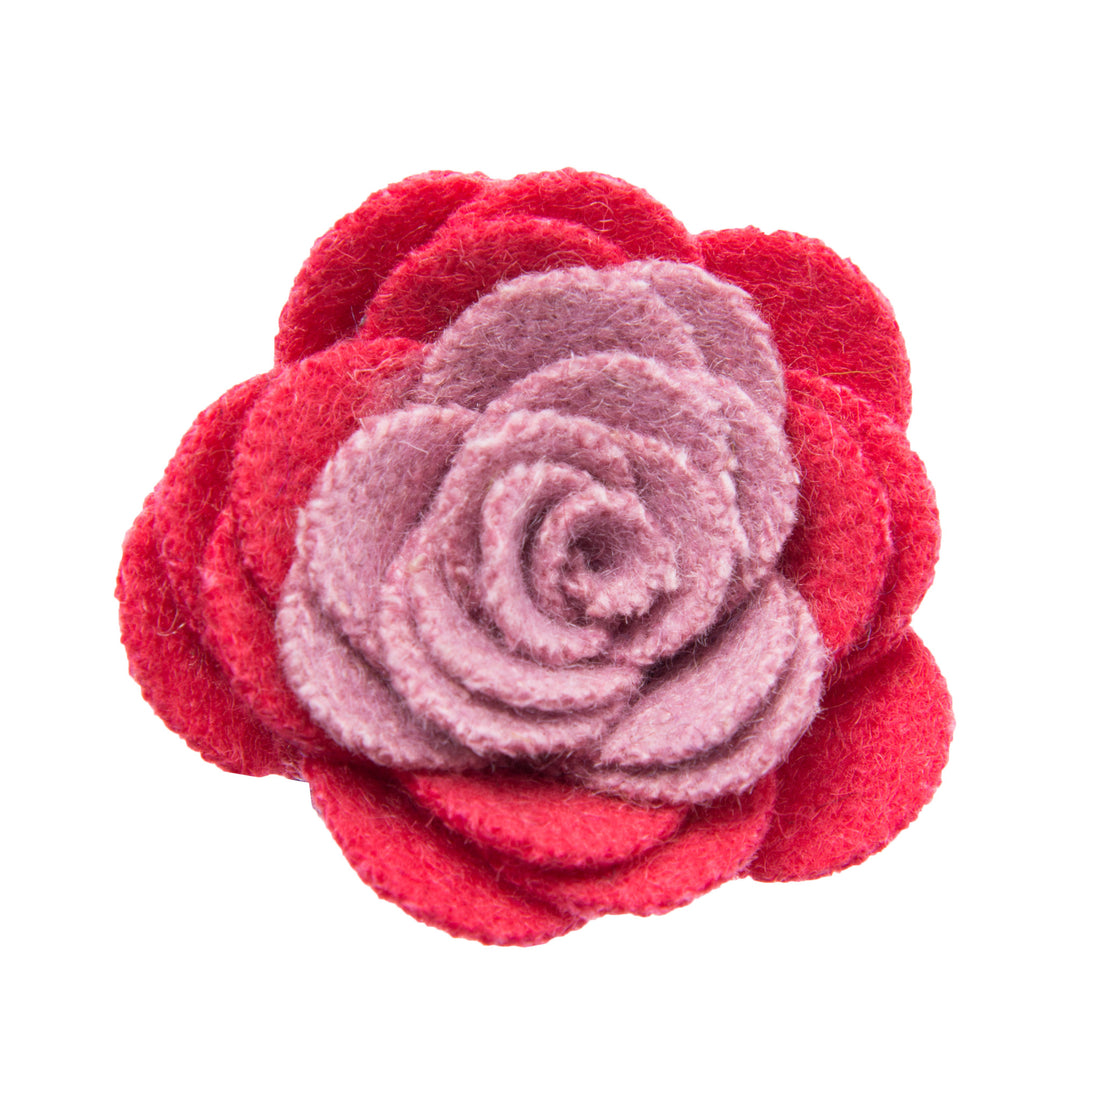 Coral and pink lapel flower